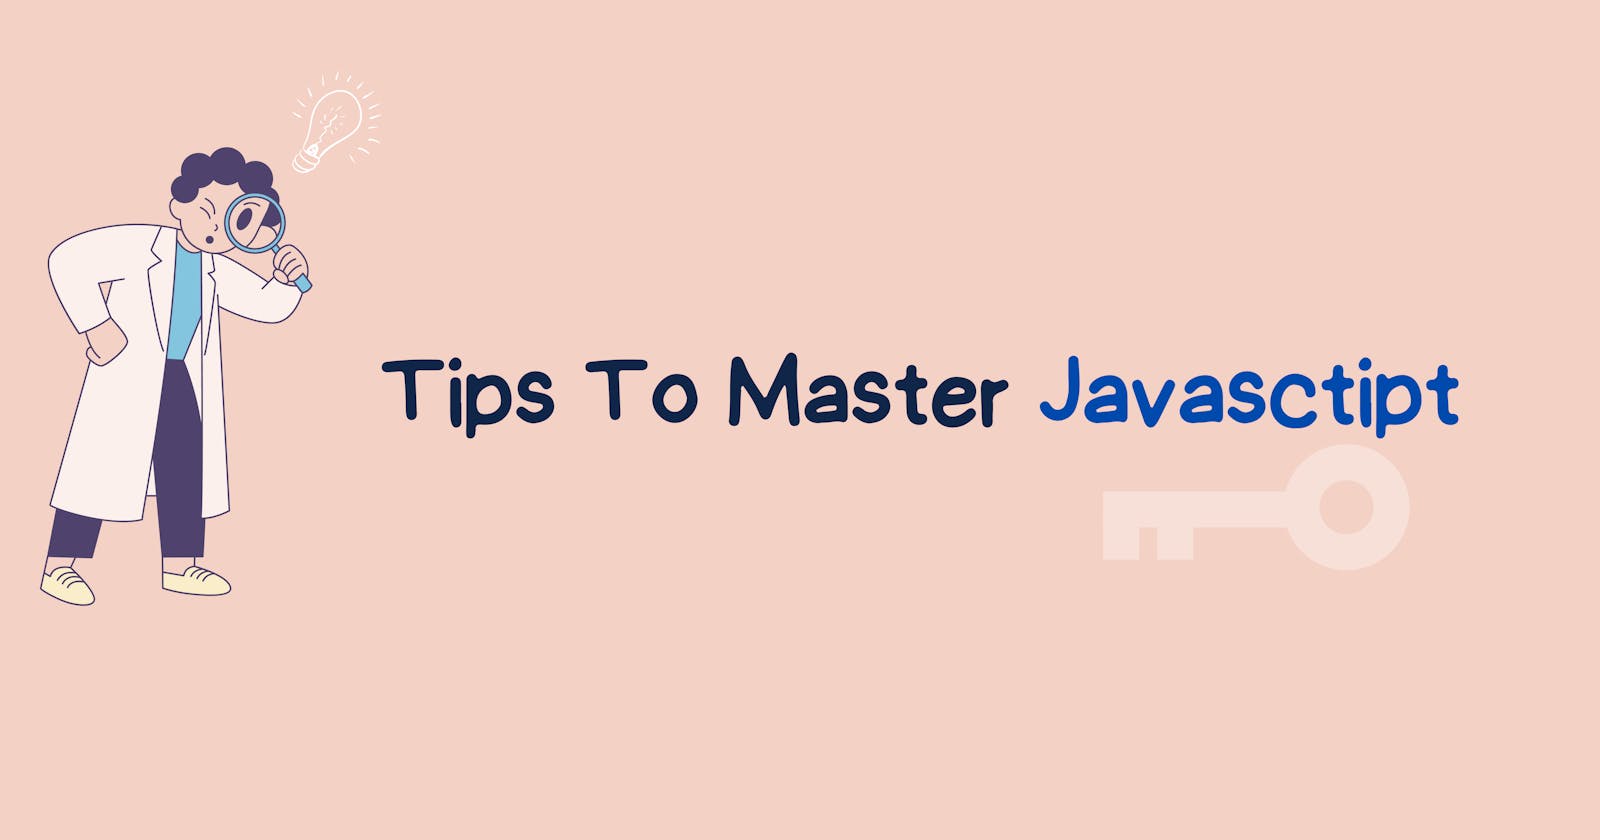 This Is How You Can Master JavaScript!